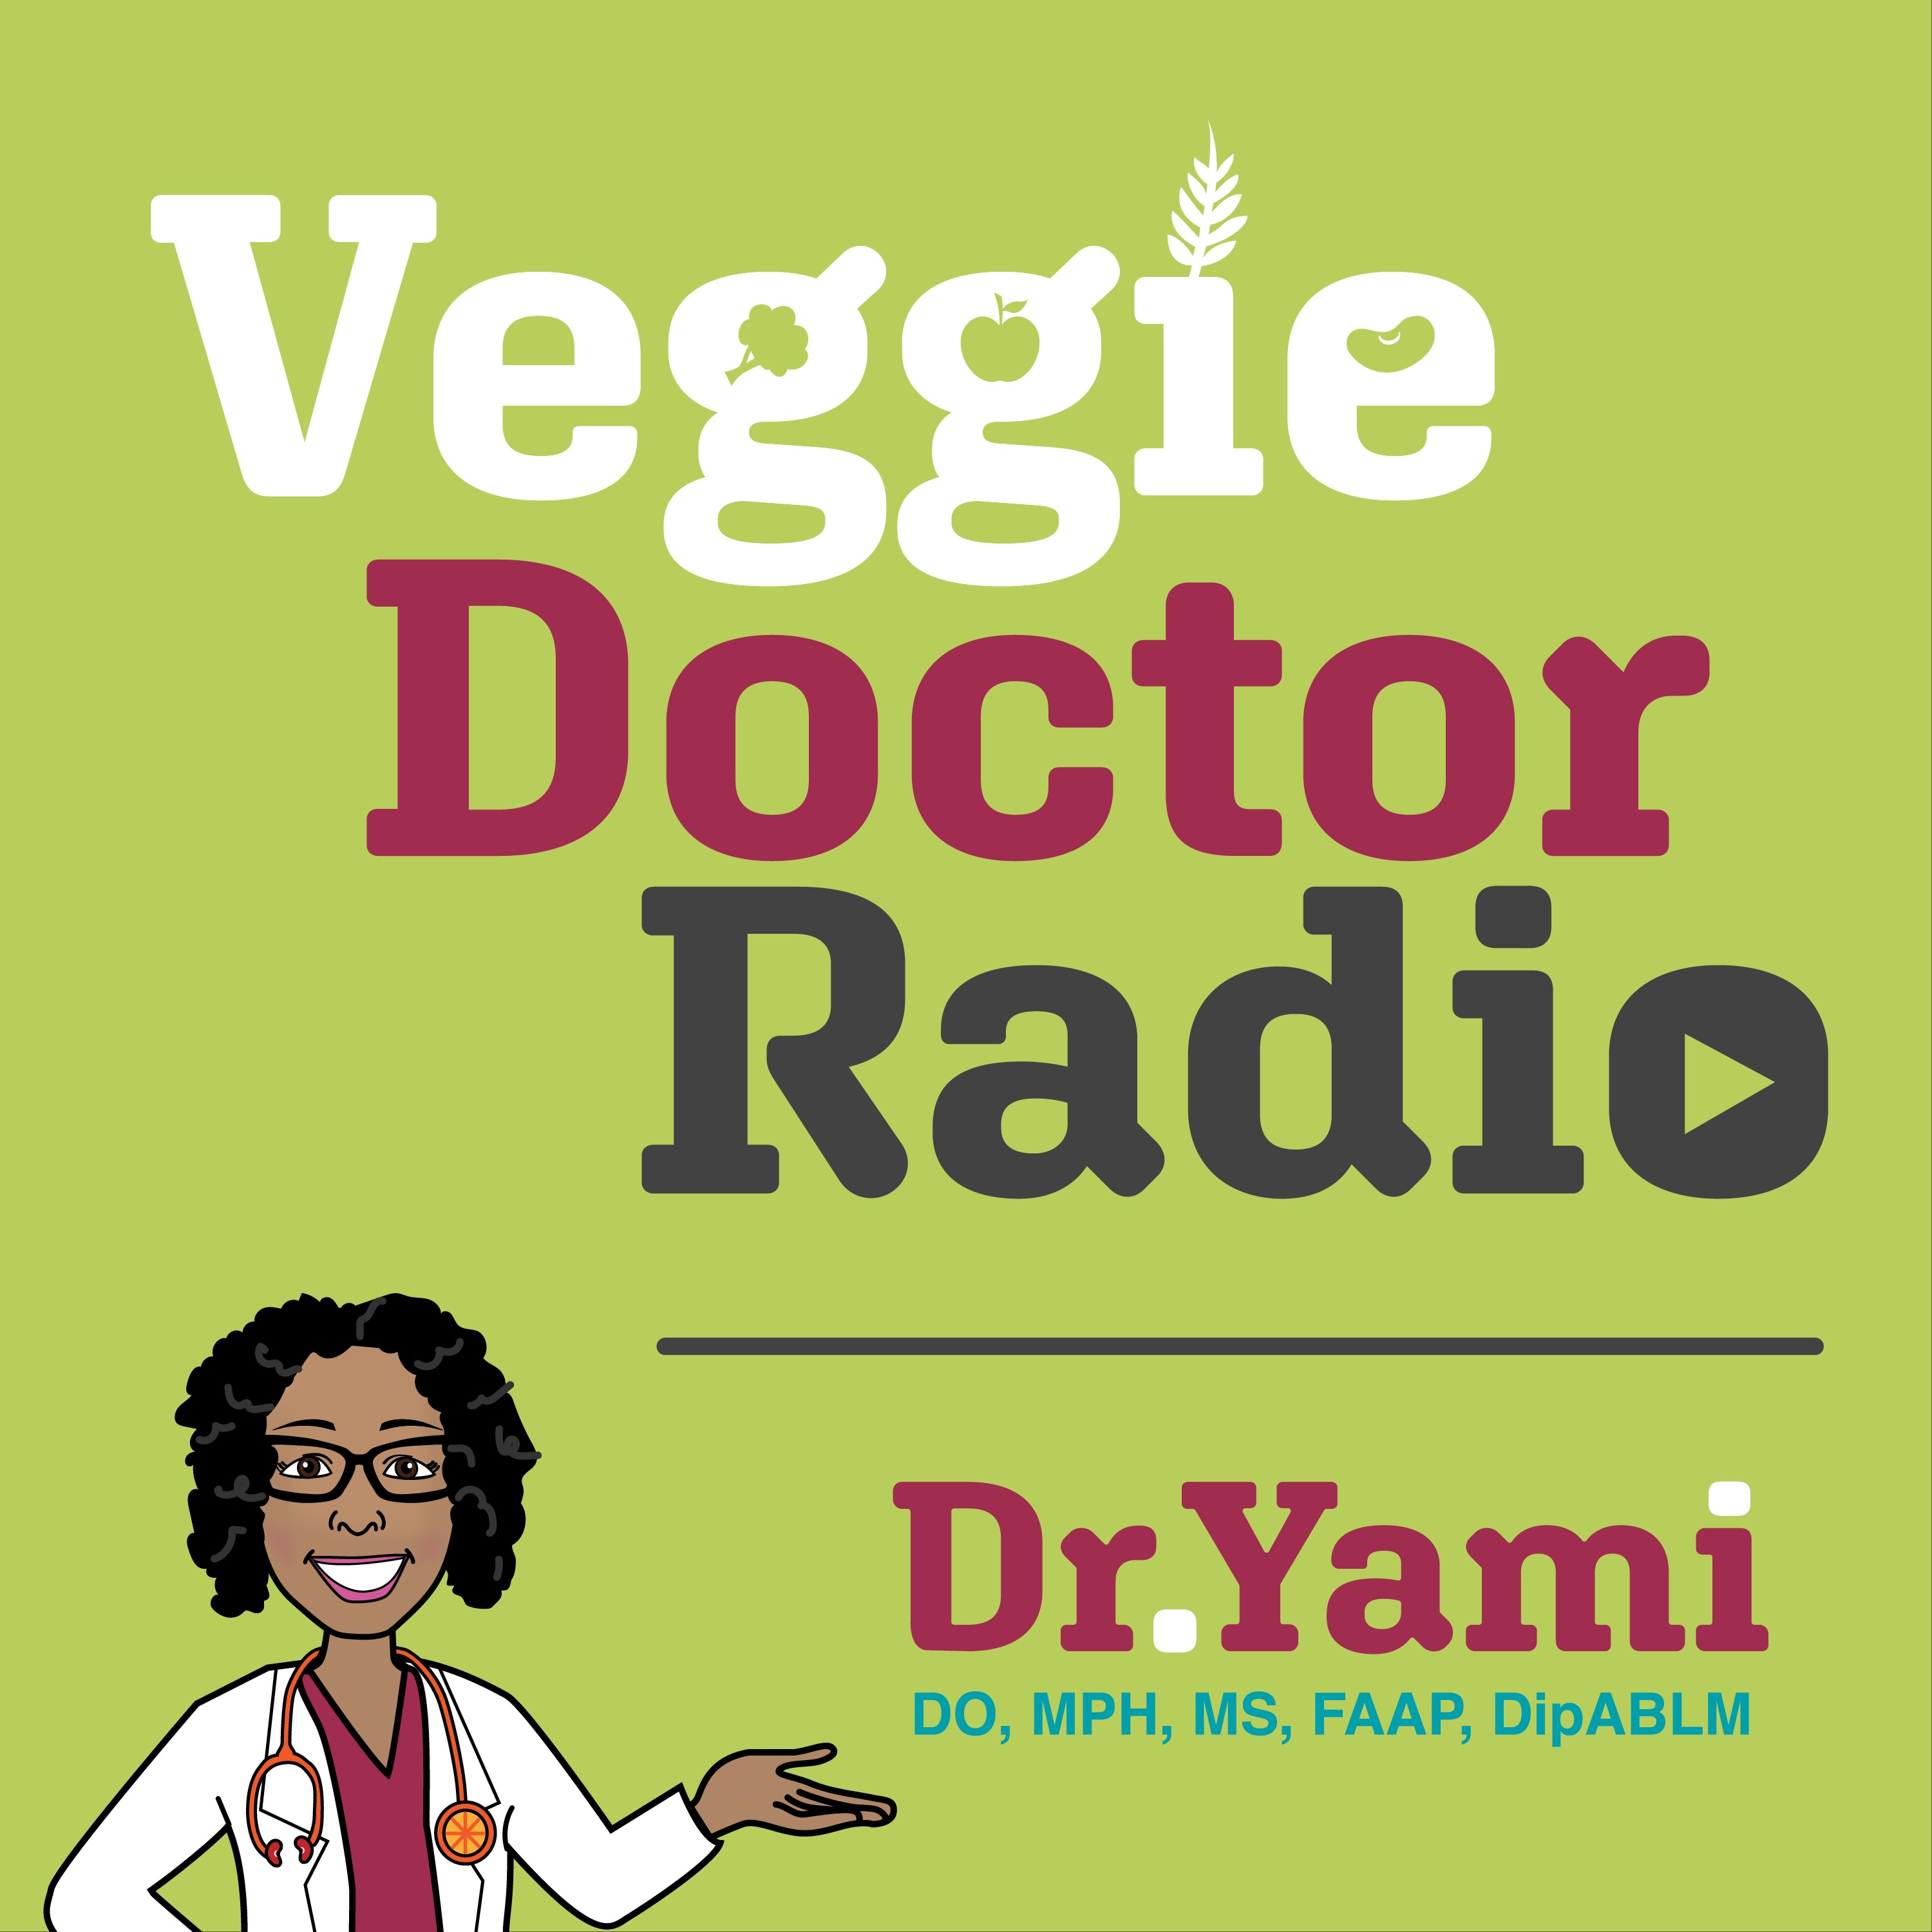 Top 4: How to make plant-based eating ridiculously easy with Carleigh Bodrug from PlantYou (Veggie Doctor Radio)